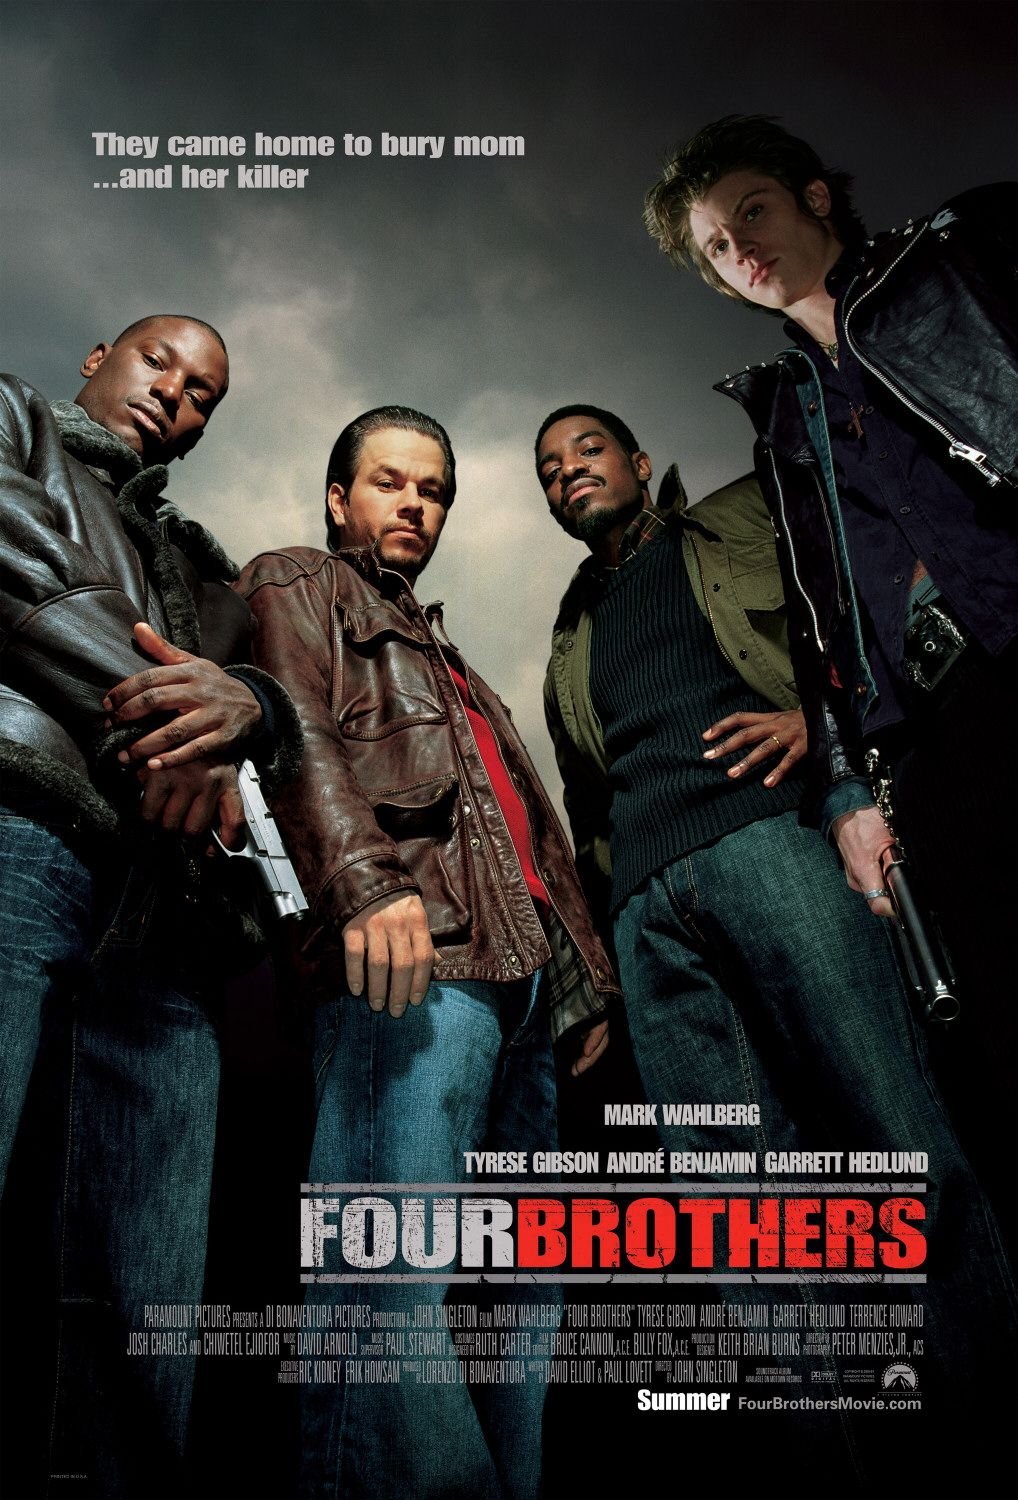 Poster of the movie Four Brothers